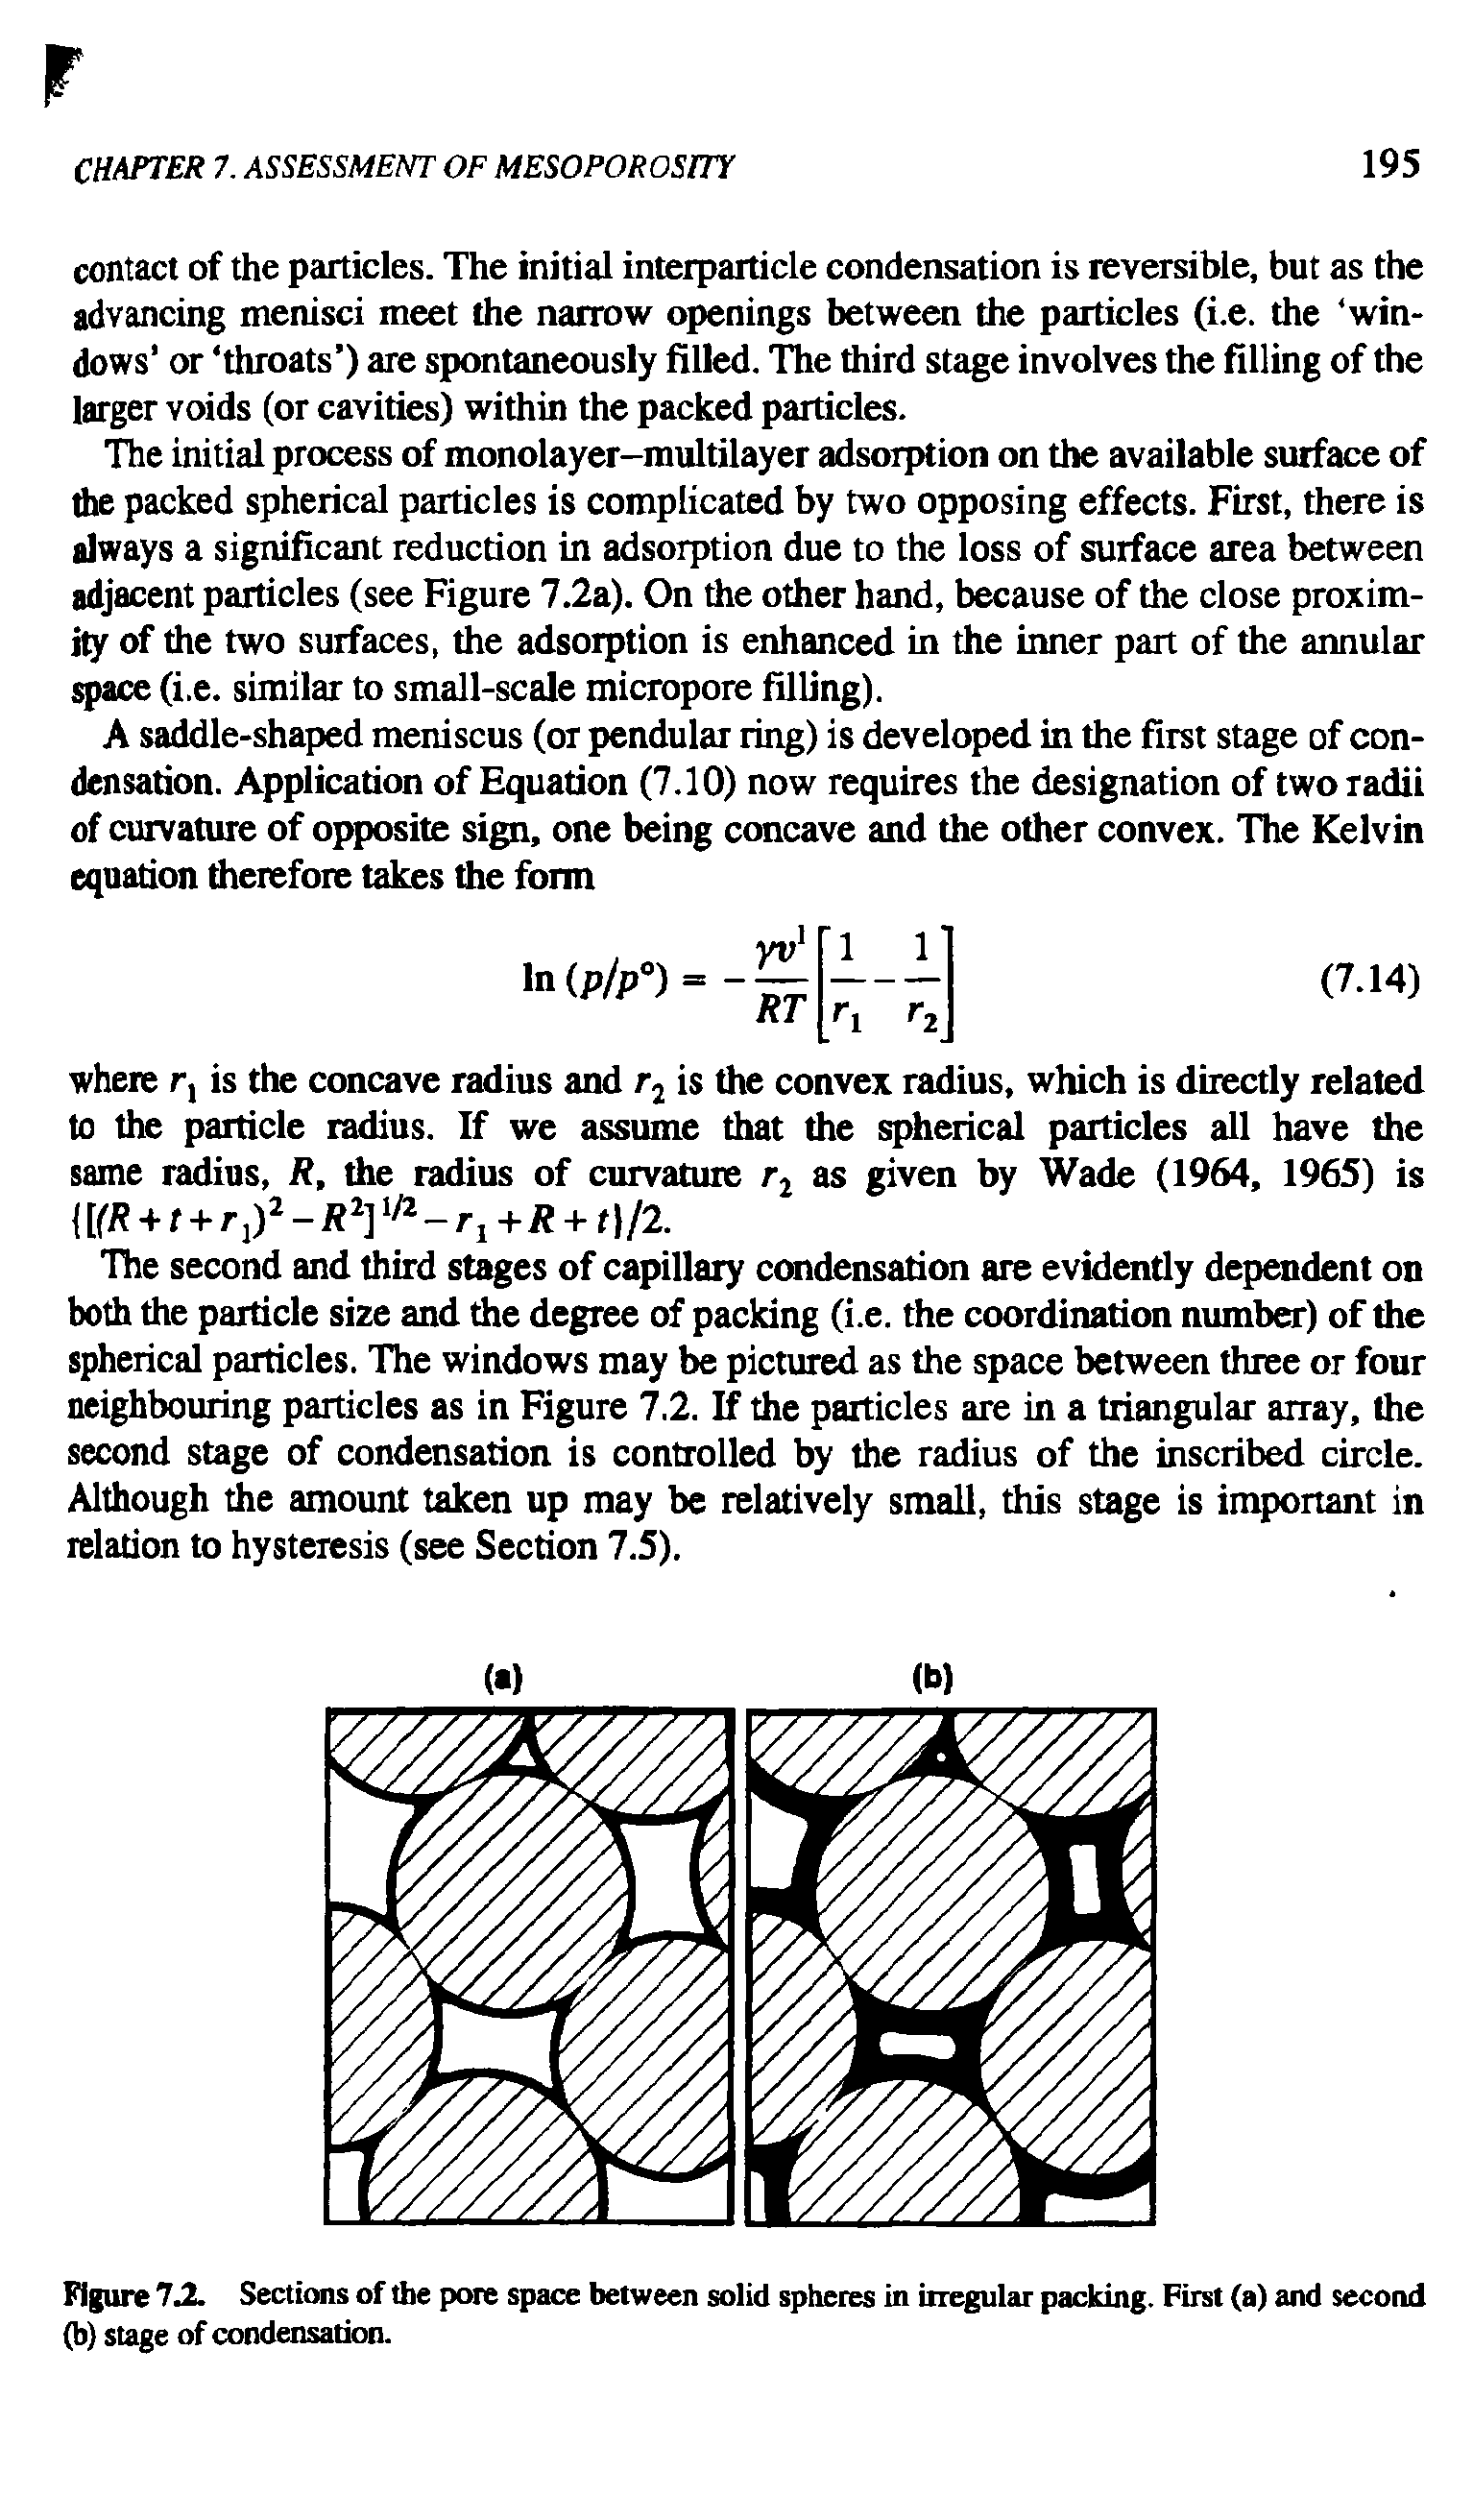 Figure 7.2. Sections of the pore space between solid spheres in irregular packing. First (a) and second (b) stage of condensation.